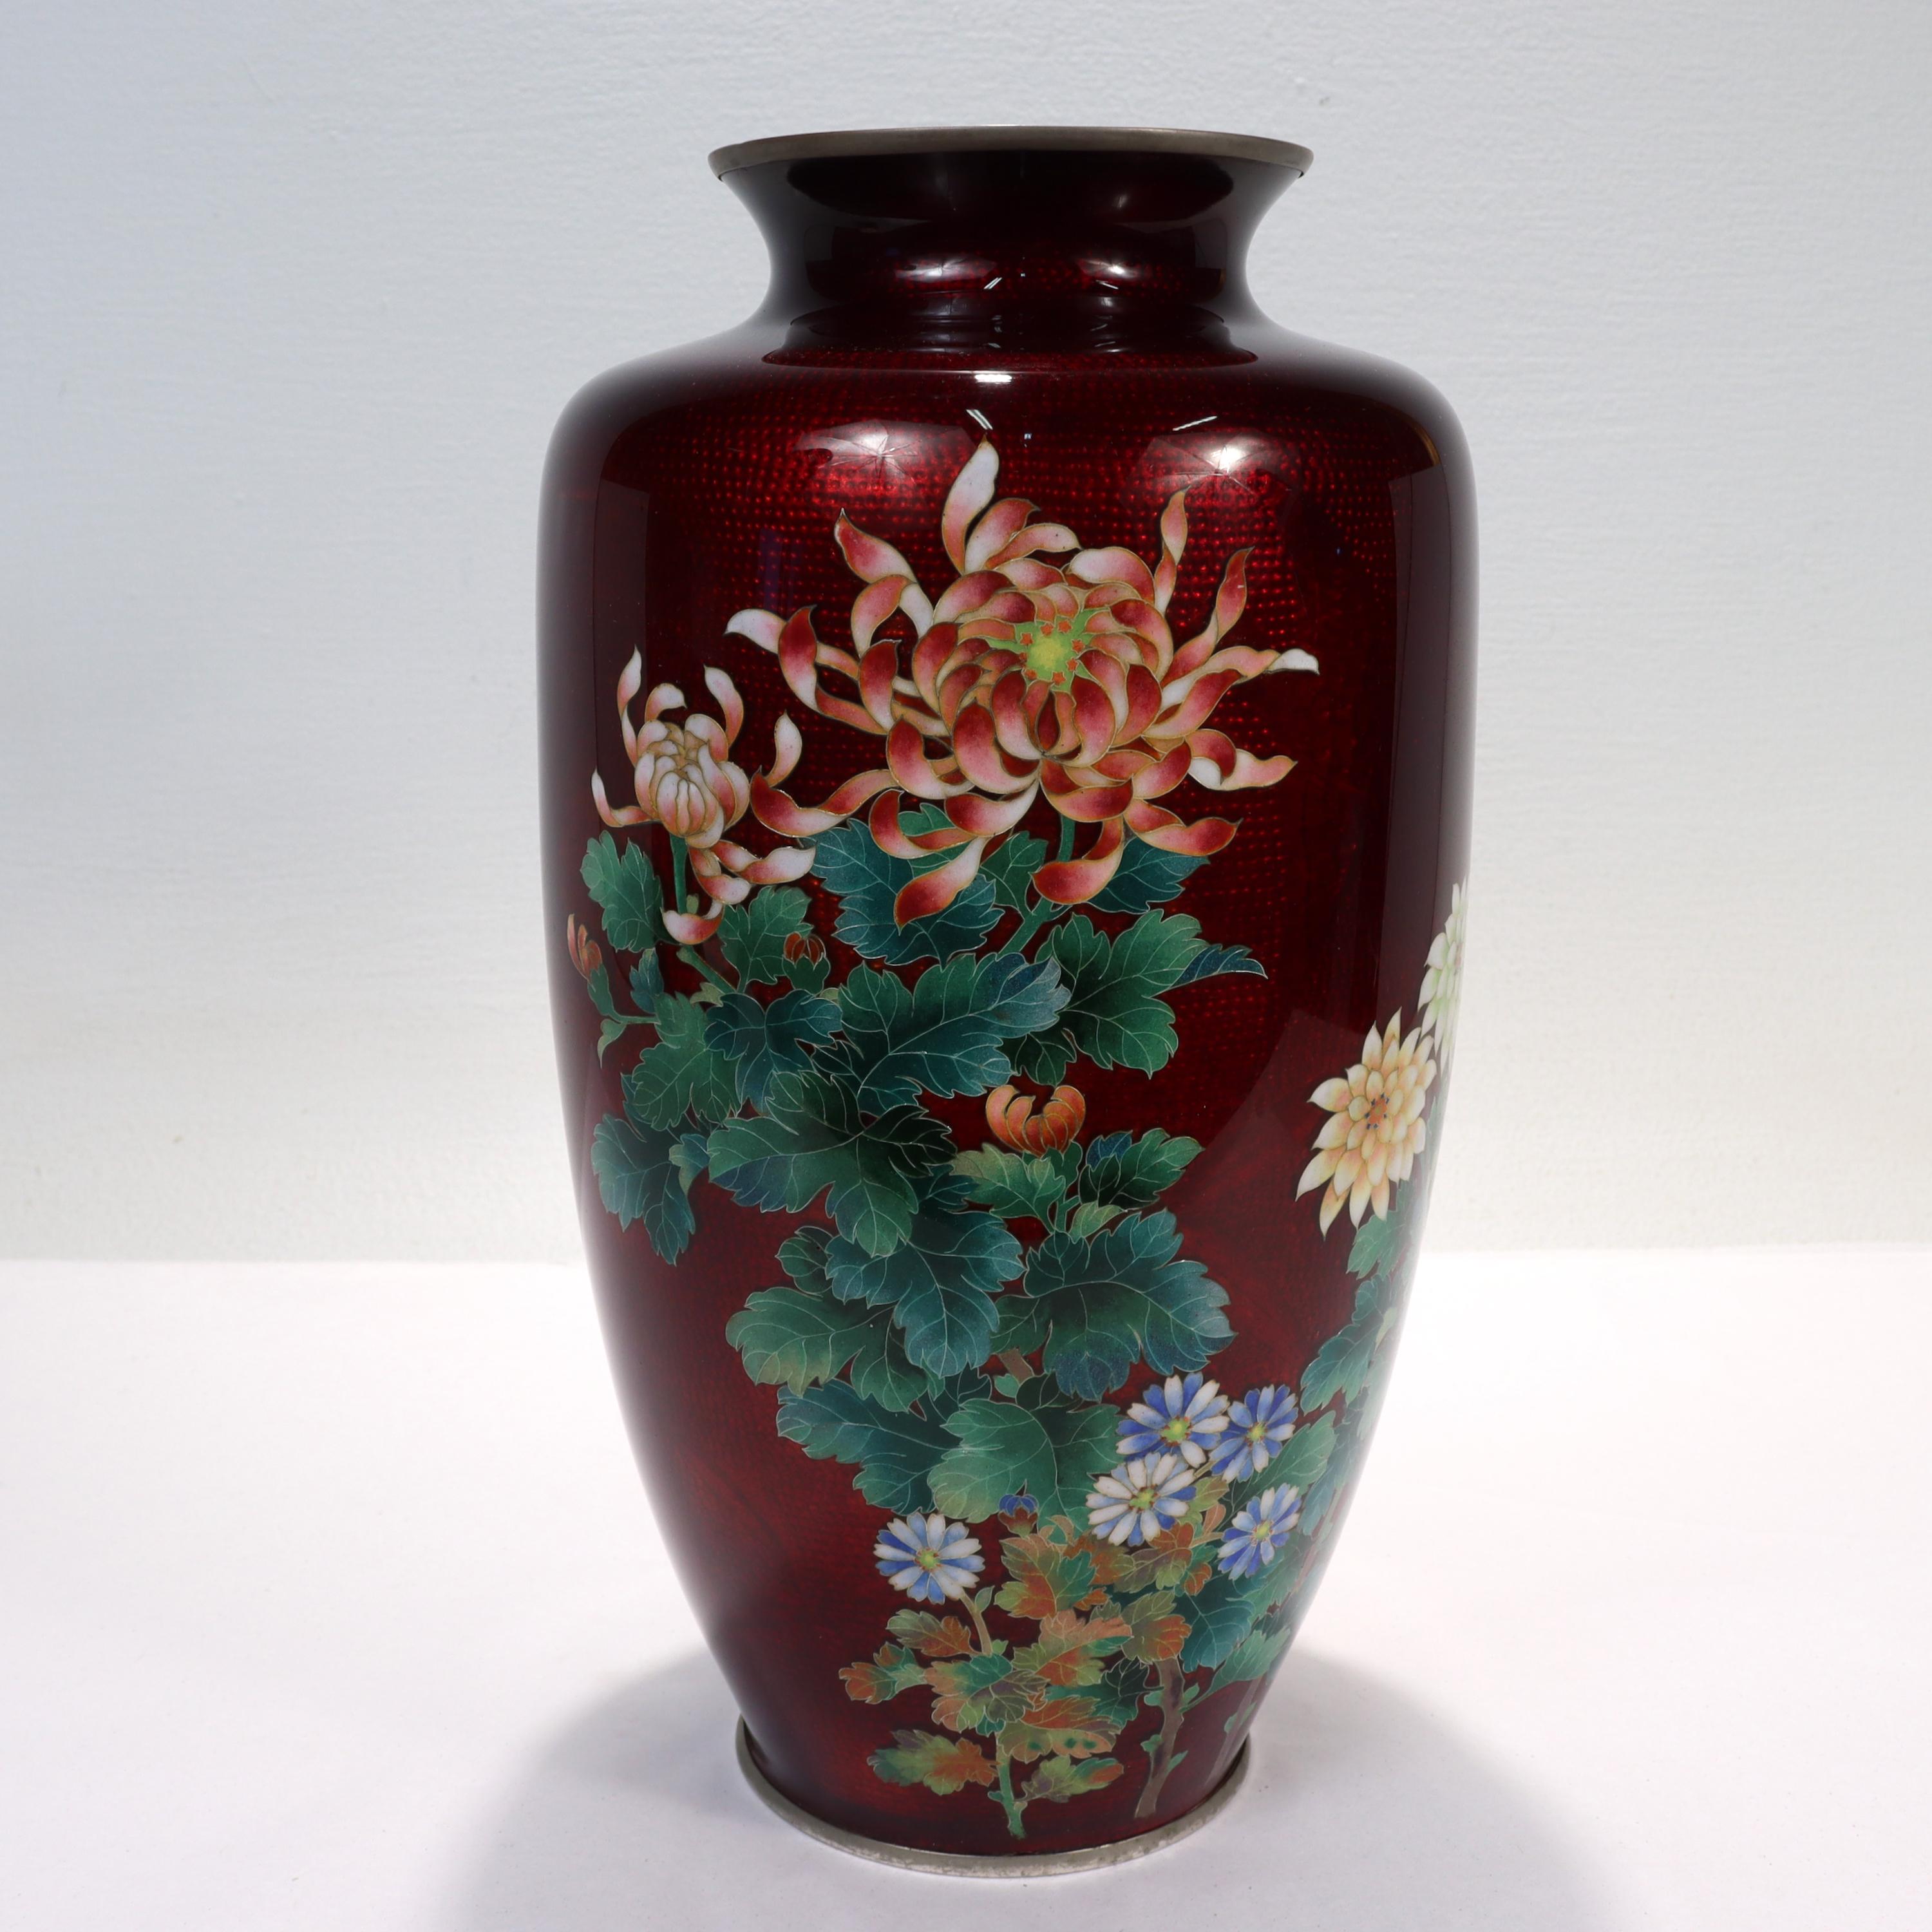 A fine antique Japanese enamel vase.

With wired cloisonne flowers against a red ginbari ground.

The ginbari technique (similar to guilloche enamel) involves flooding transparent enamel over a patterned metal surface. This creates a shiny